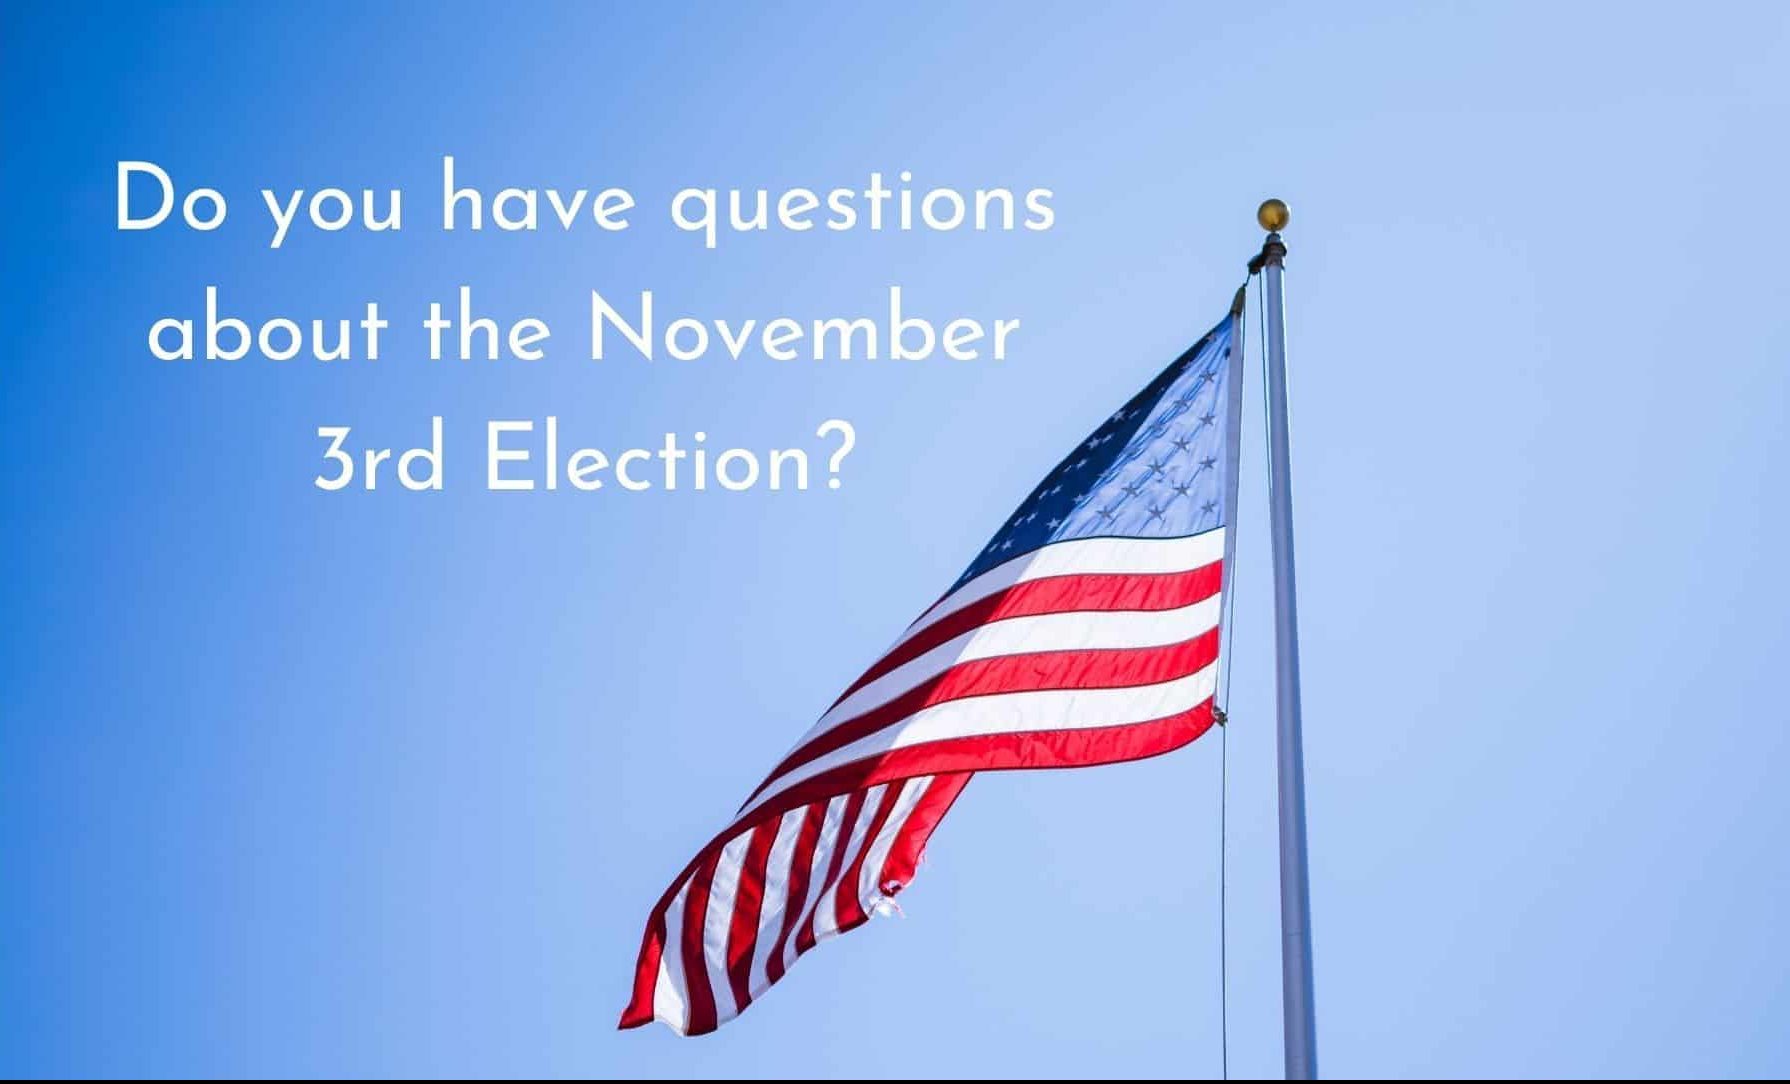 Find answers for the November 3rd election